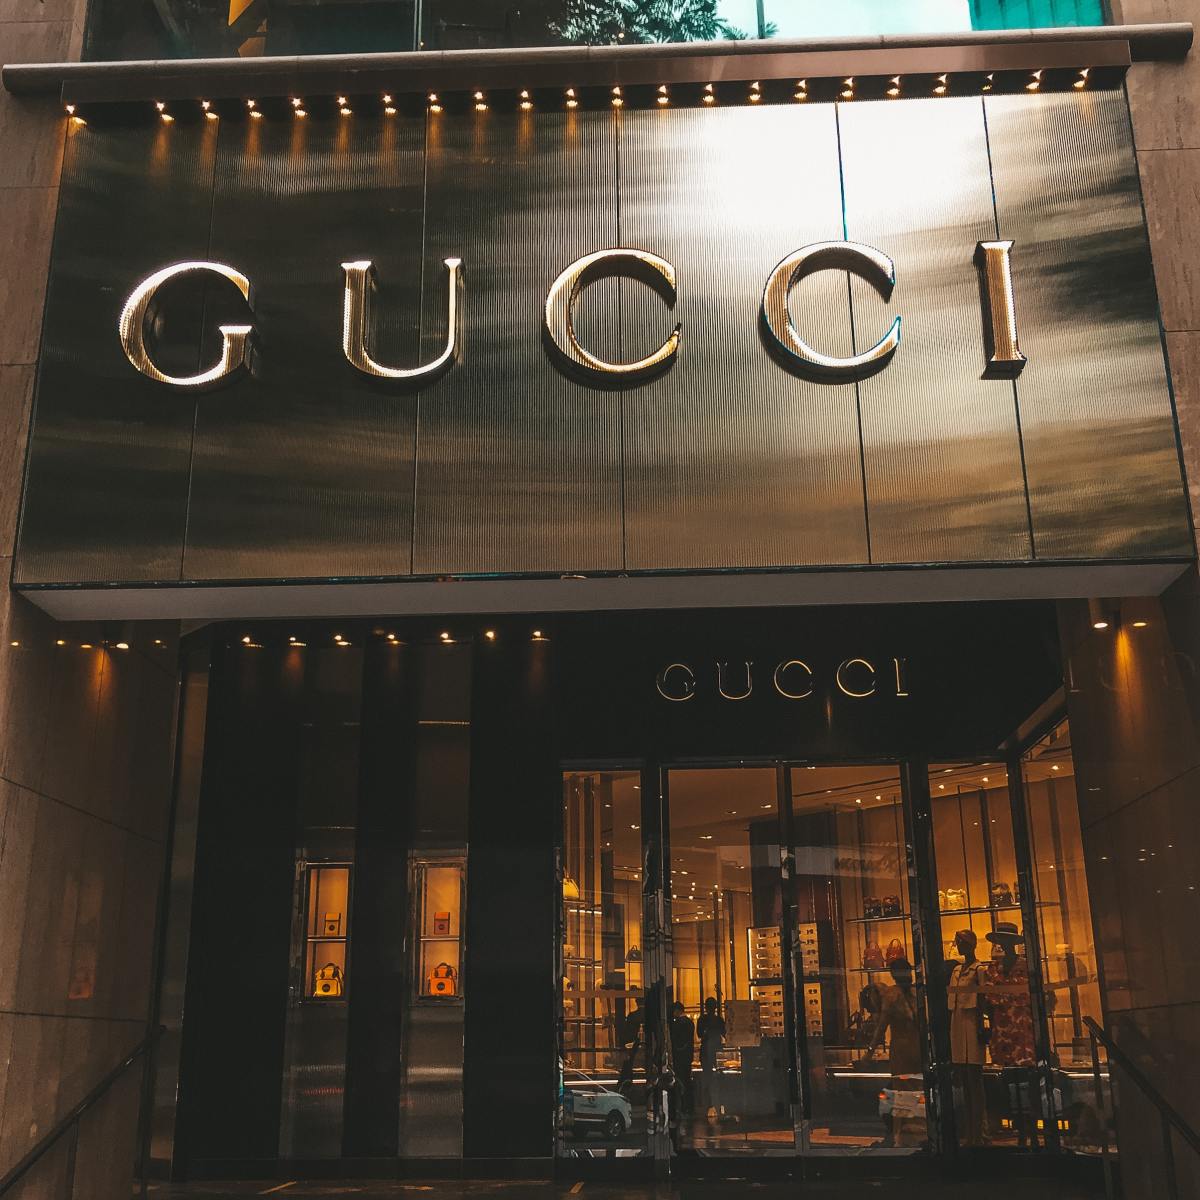 Gucci is an iconic fashion house.